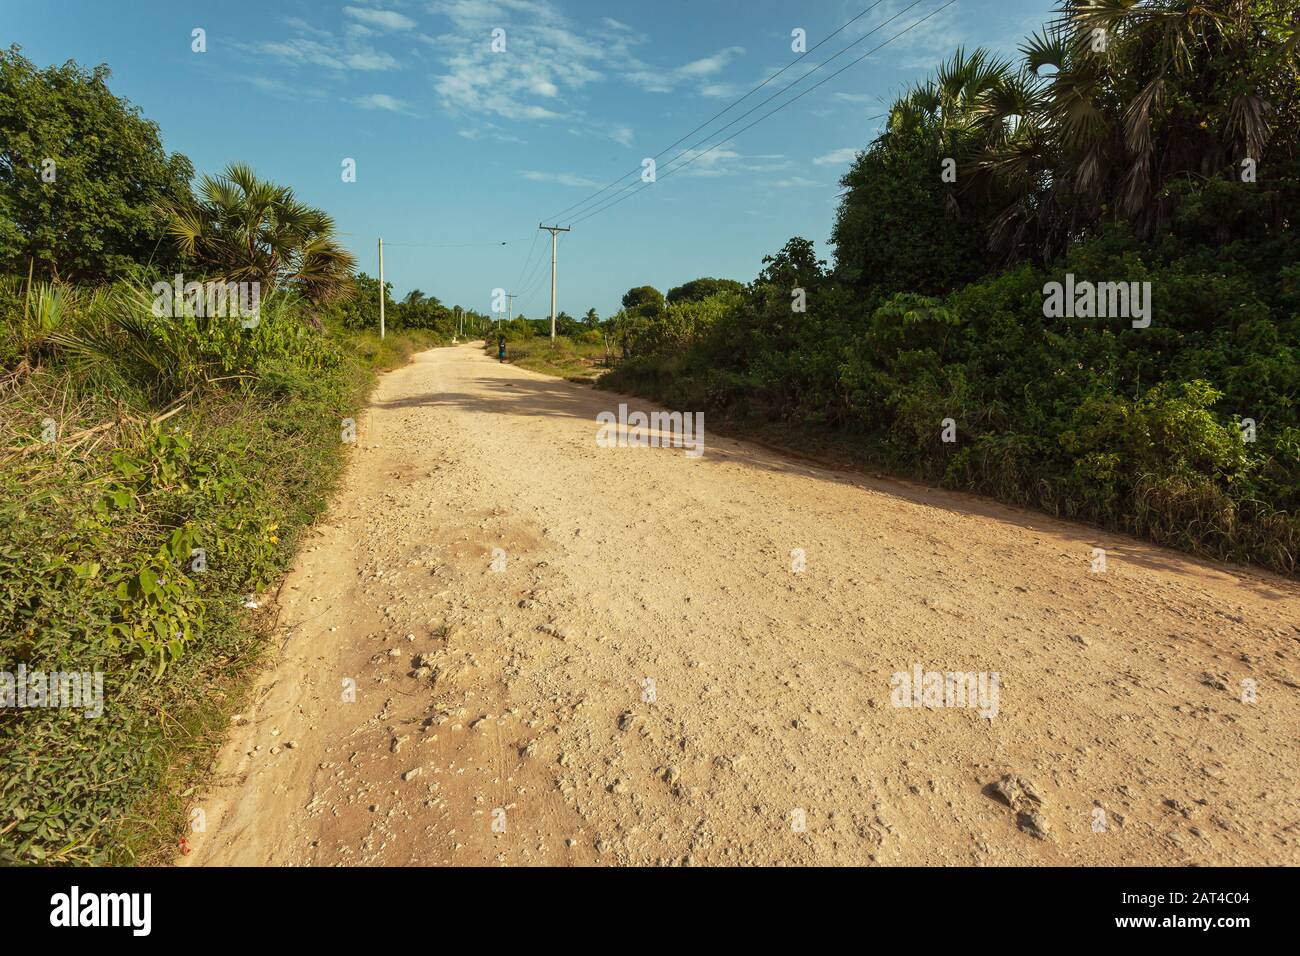 A dry road in rural Kenya with green plants by the road, no people Stock Photo